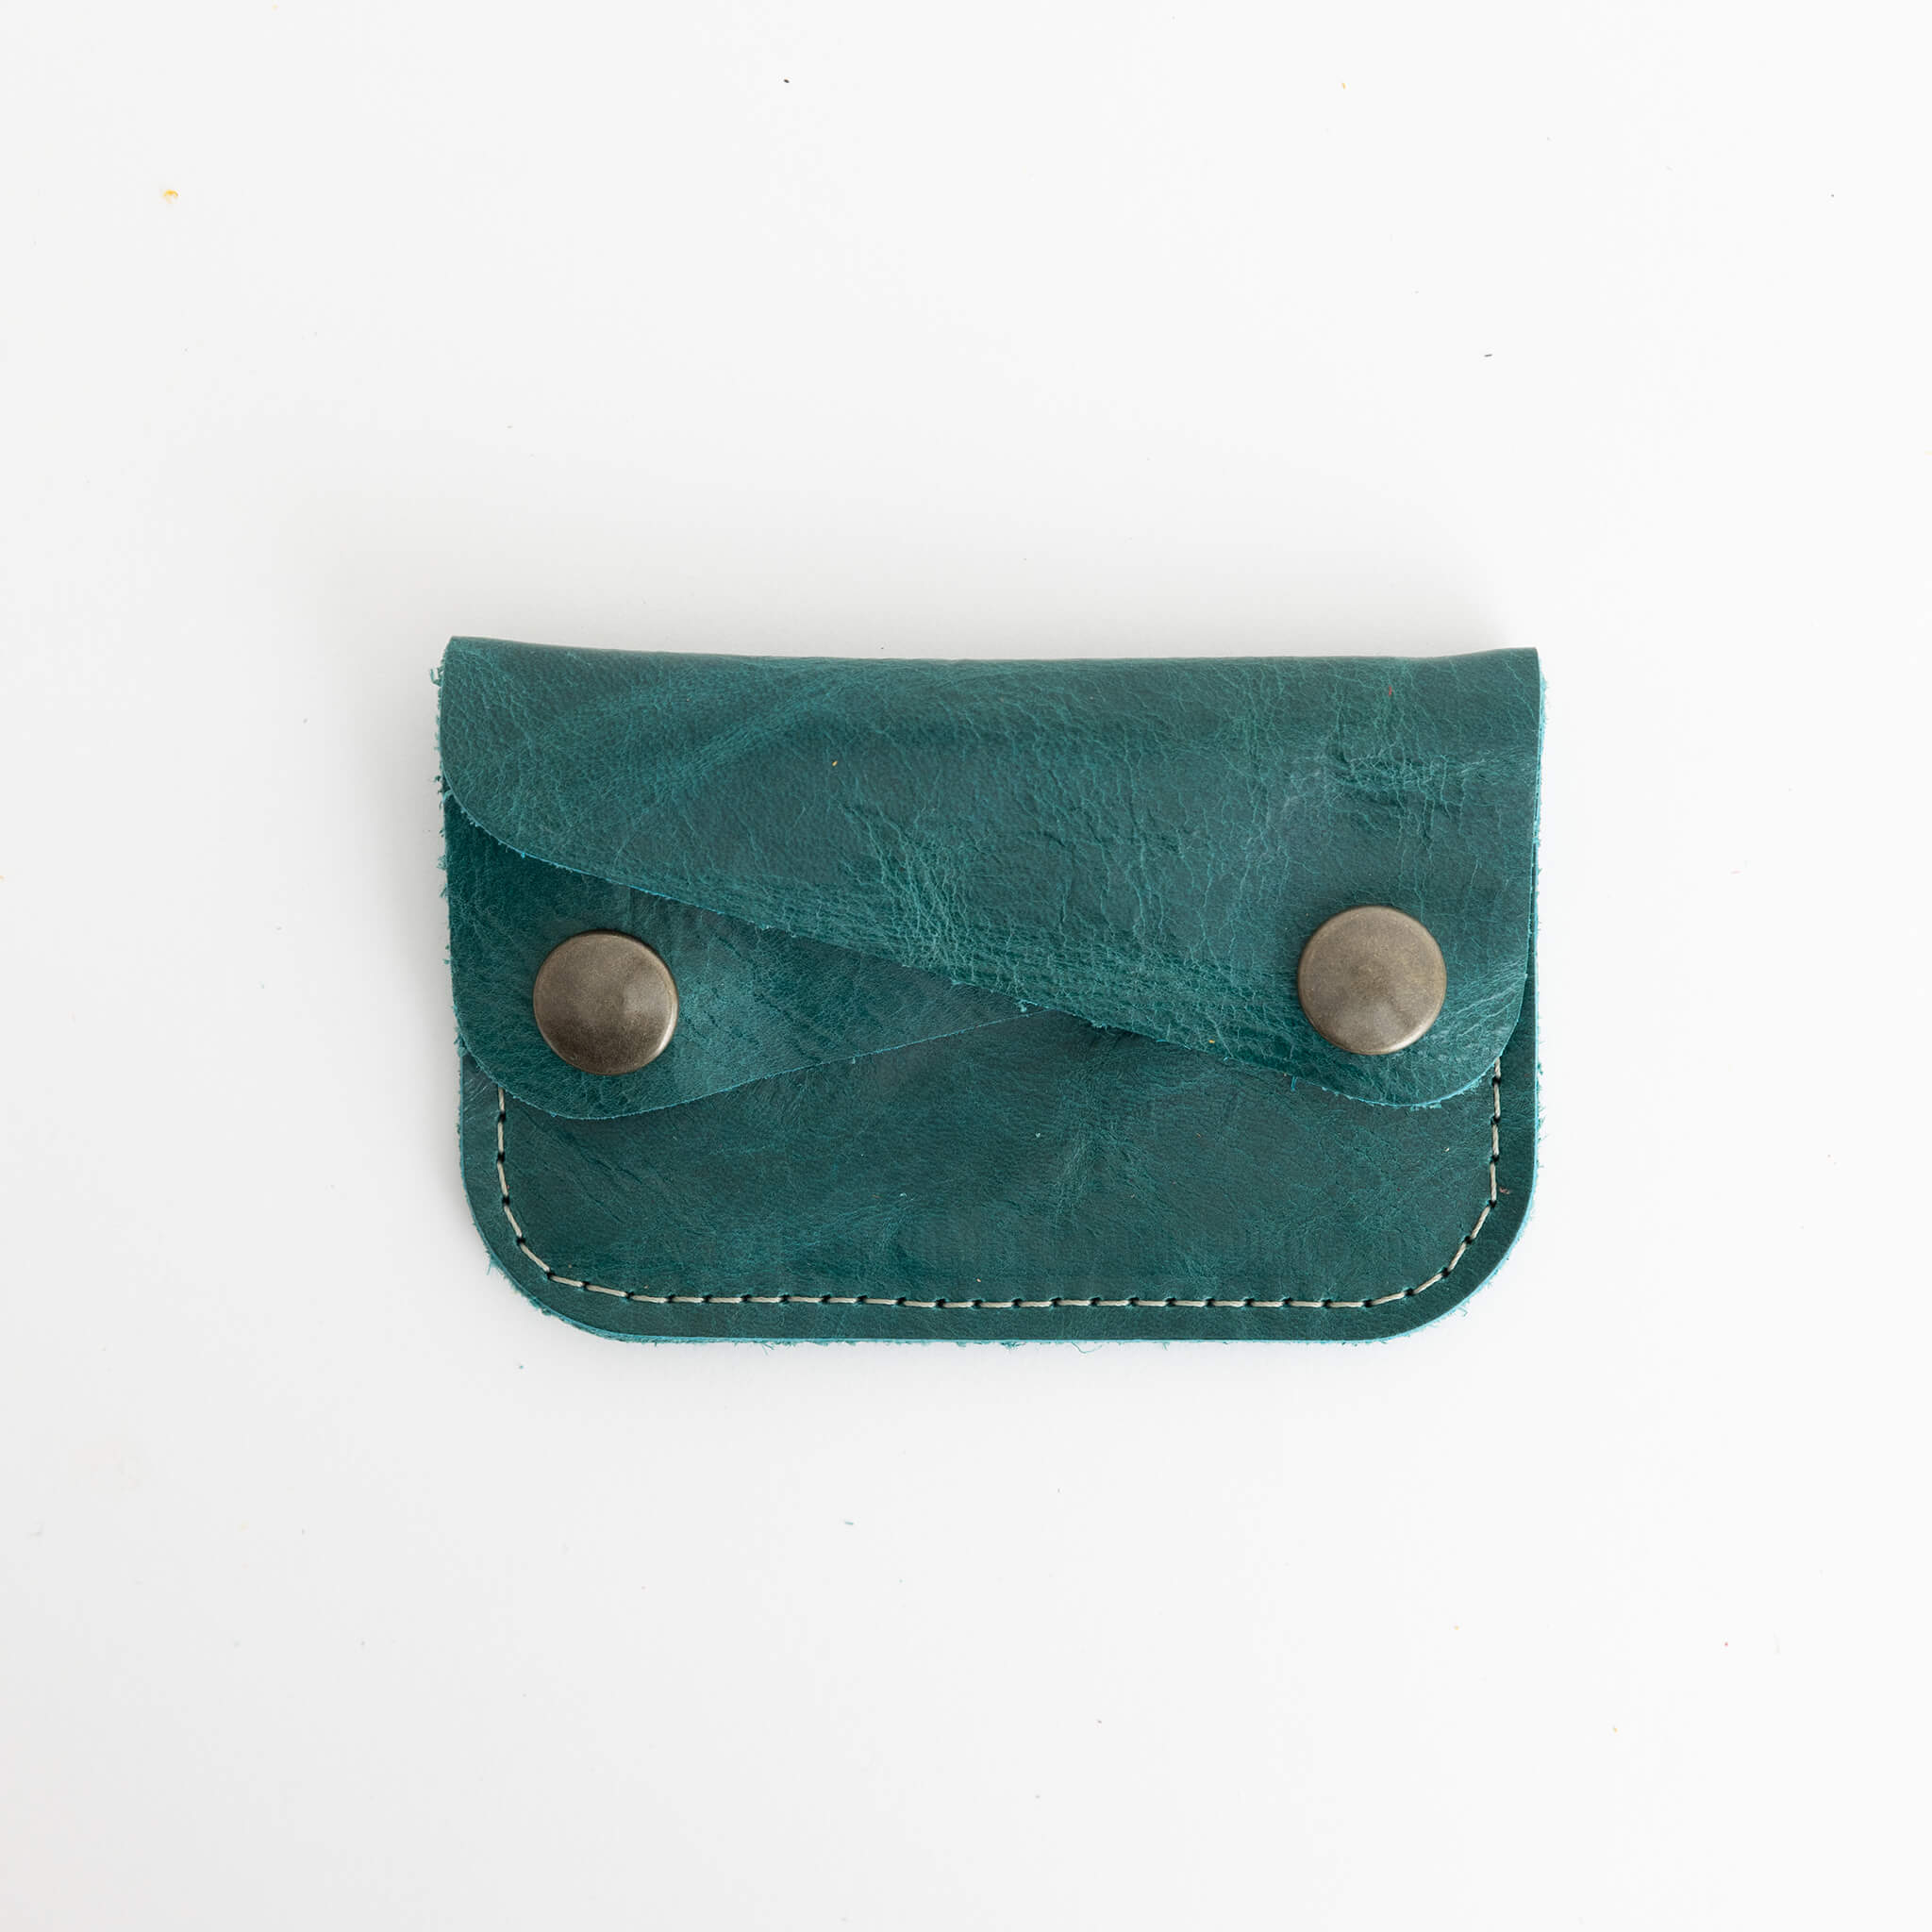 river card wallet - unisex double snap - handmade leather - ocean front view